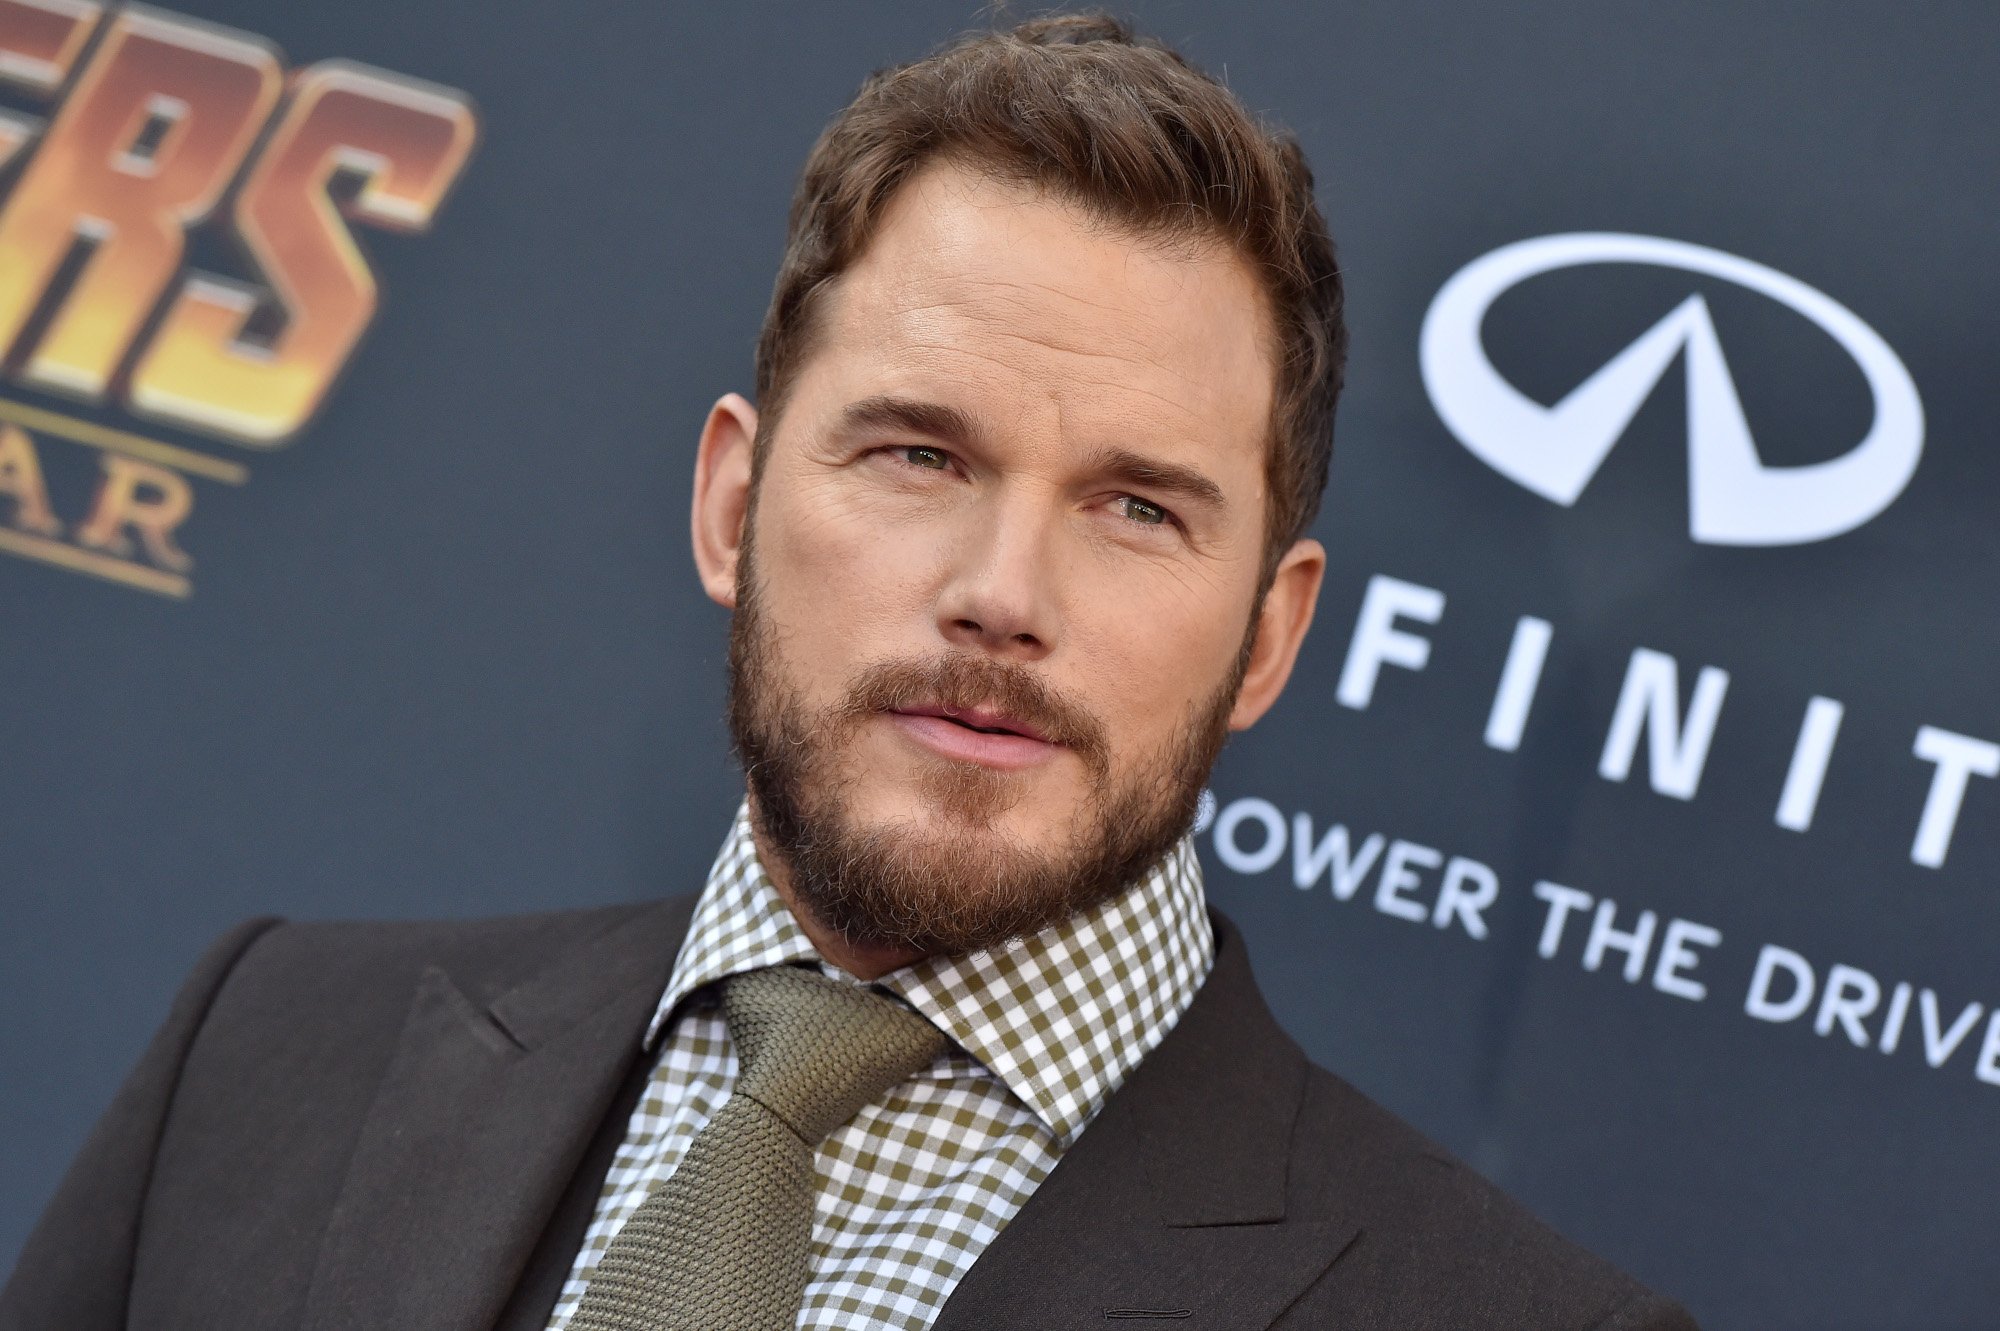 'Guardians of the Galaxy' star Chris Pratt, who appears in 'Thor: Love and Thunder' alongside Chris Hemsworth. The image shows him on the red carpet for 'Avengers: Infinity War.' He's wearing a checkered shirt, suit jacket, and tie.